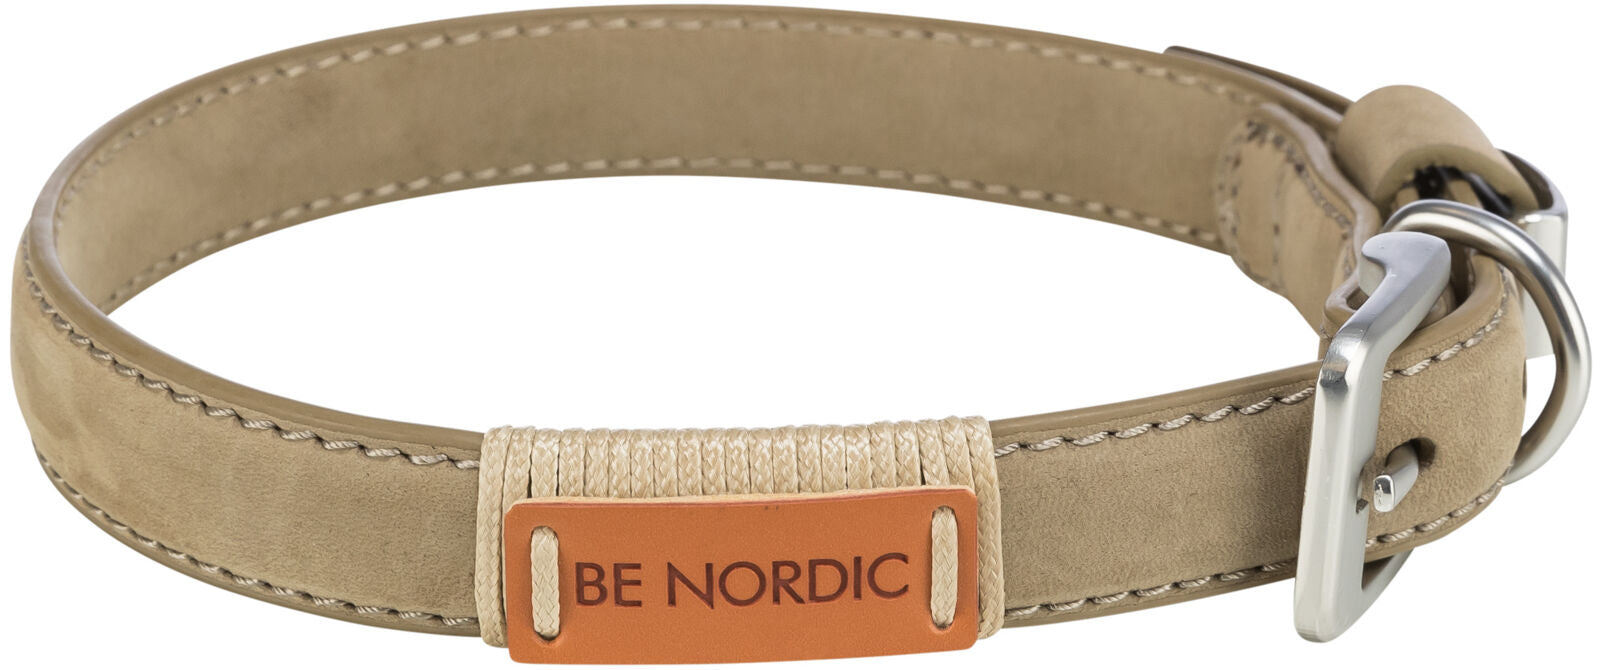 Be Nordic Leather Collar